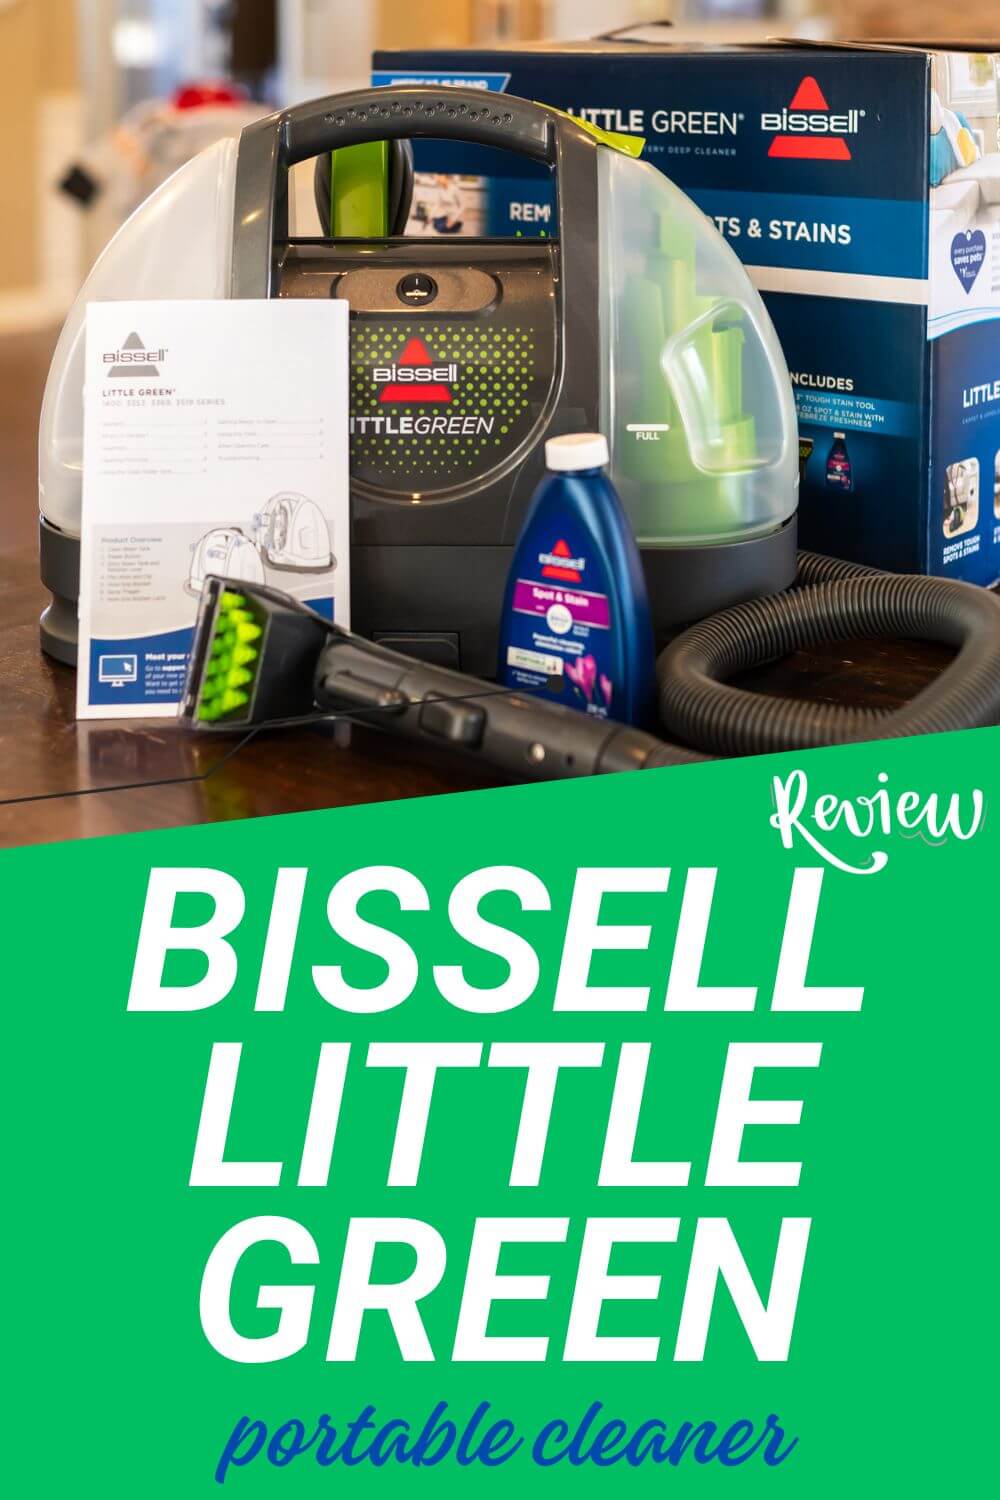 Review of Bissell Little Green Cleaning Machine